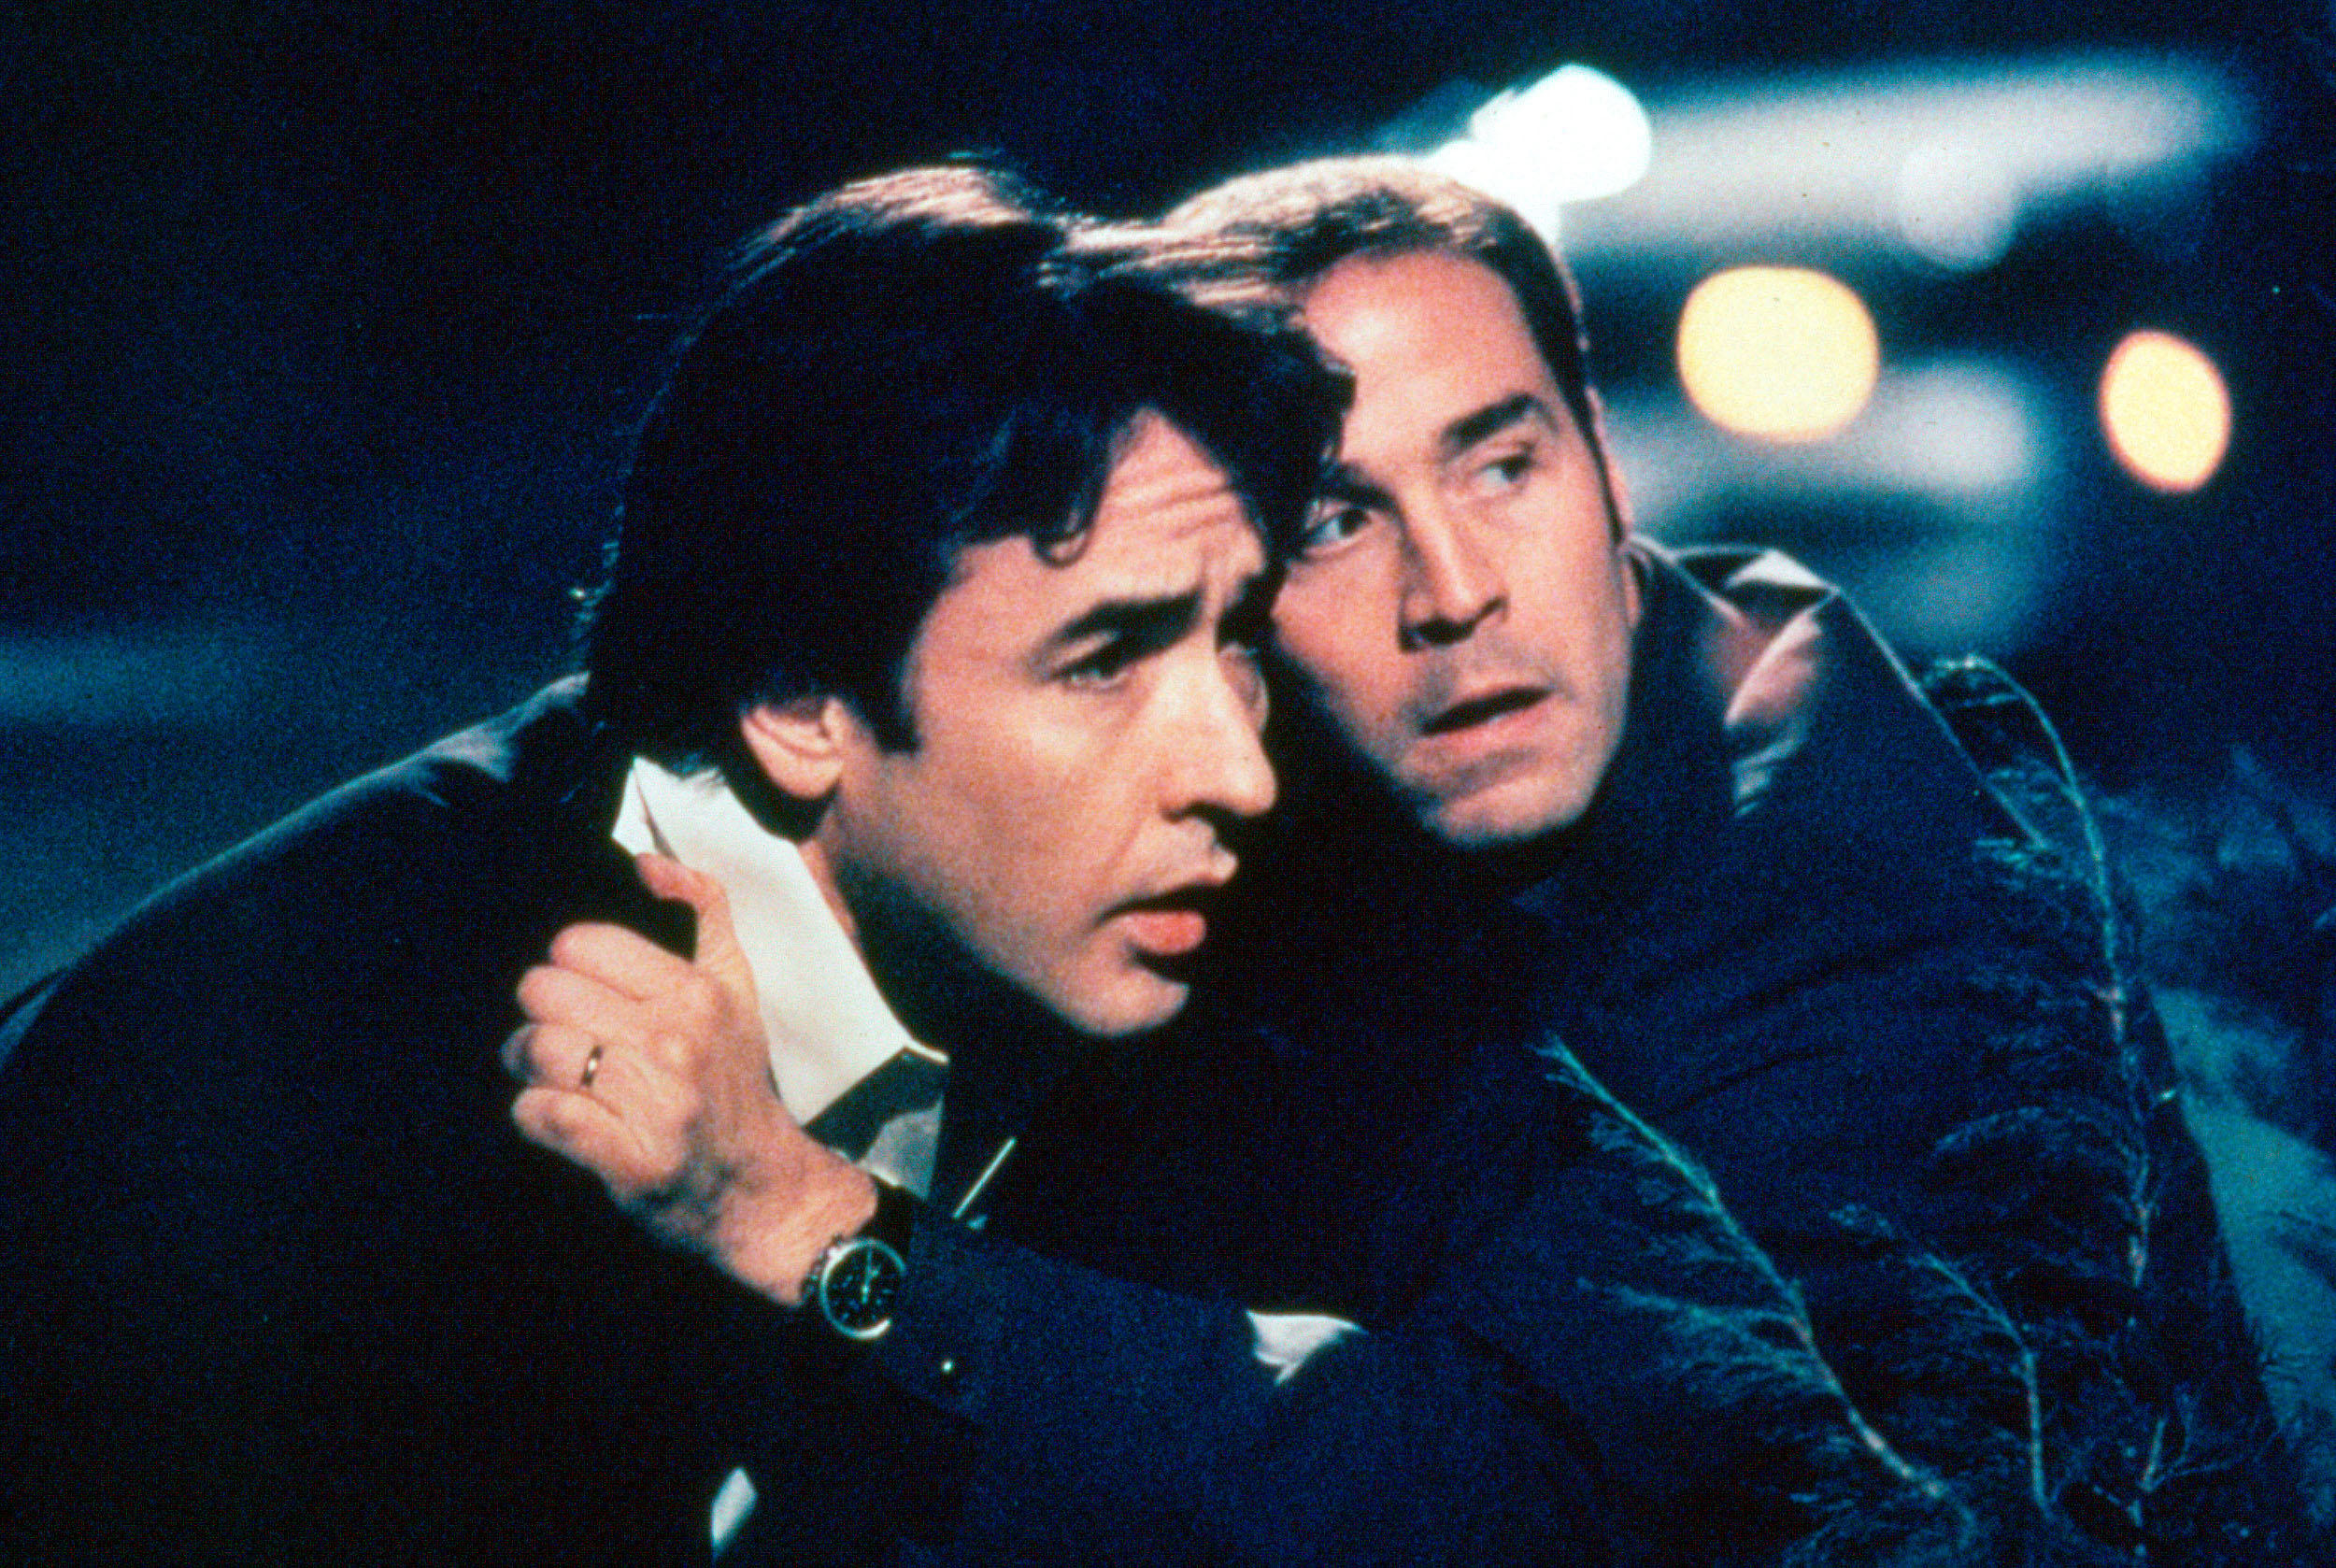 John Cusack and Jeremy Piven grab one another while hiding